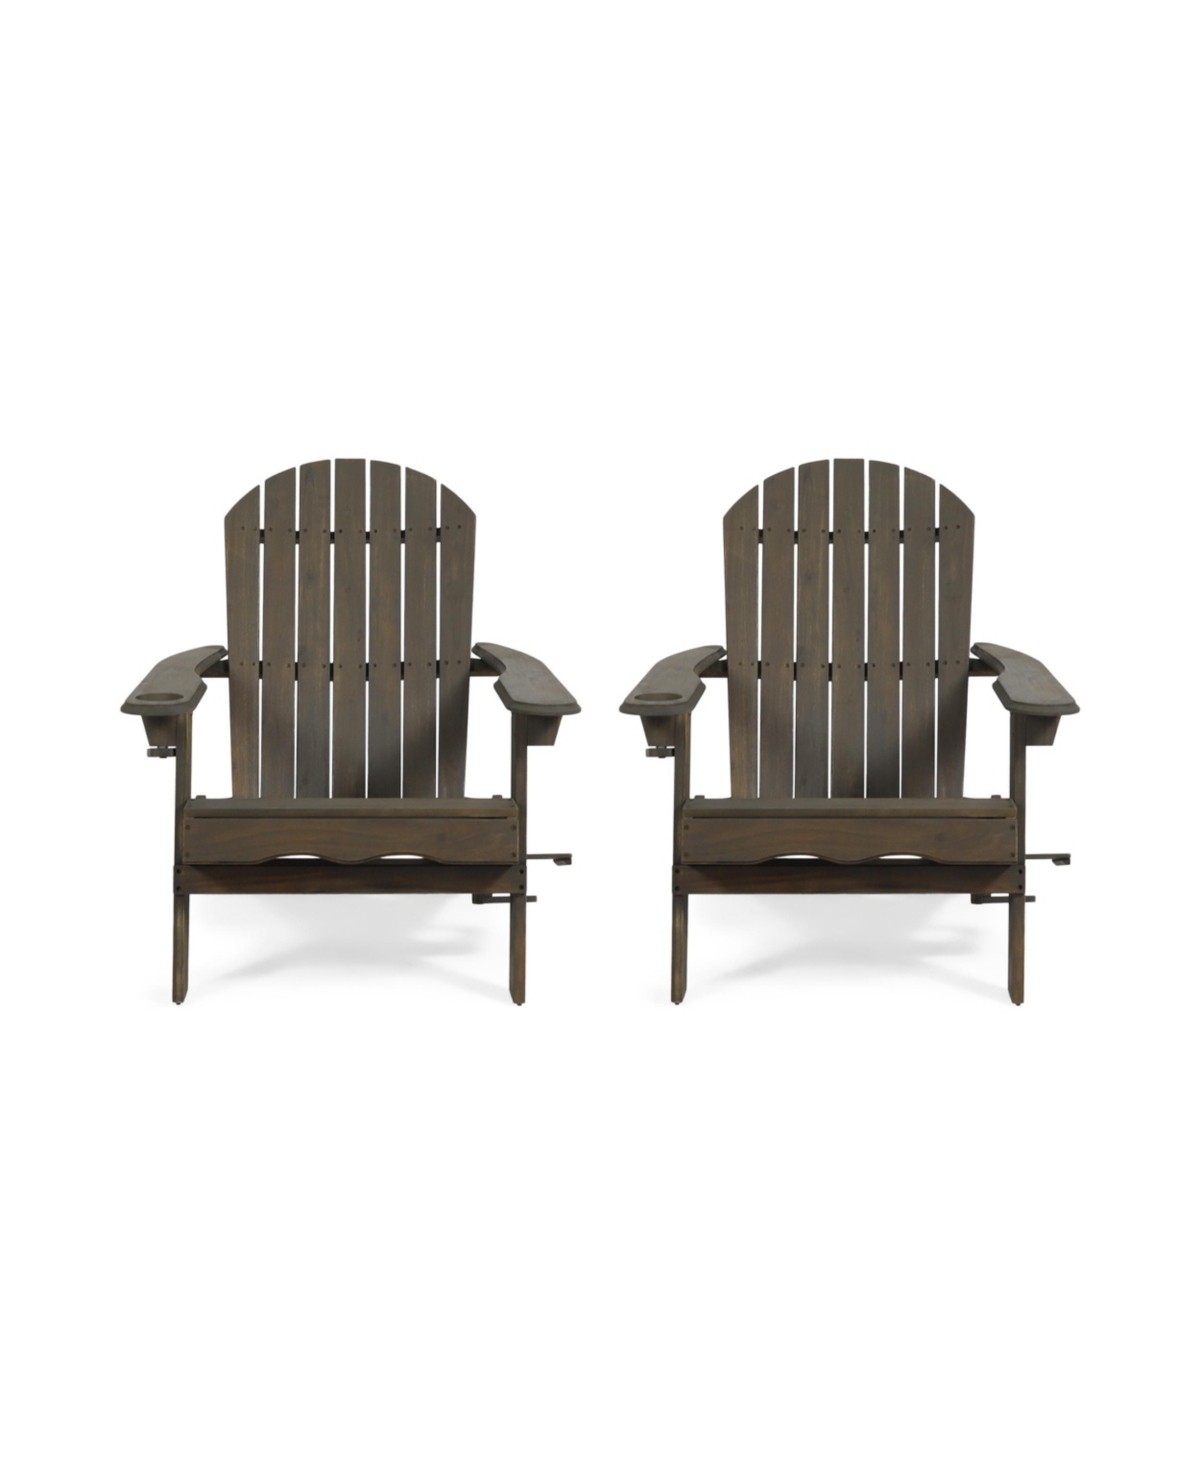 Noble House Bellwood Outdoor Folding Adirondack Chairs Set, 2 Piece In Gray